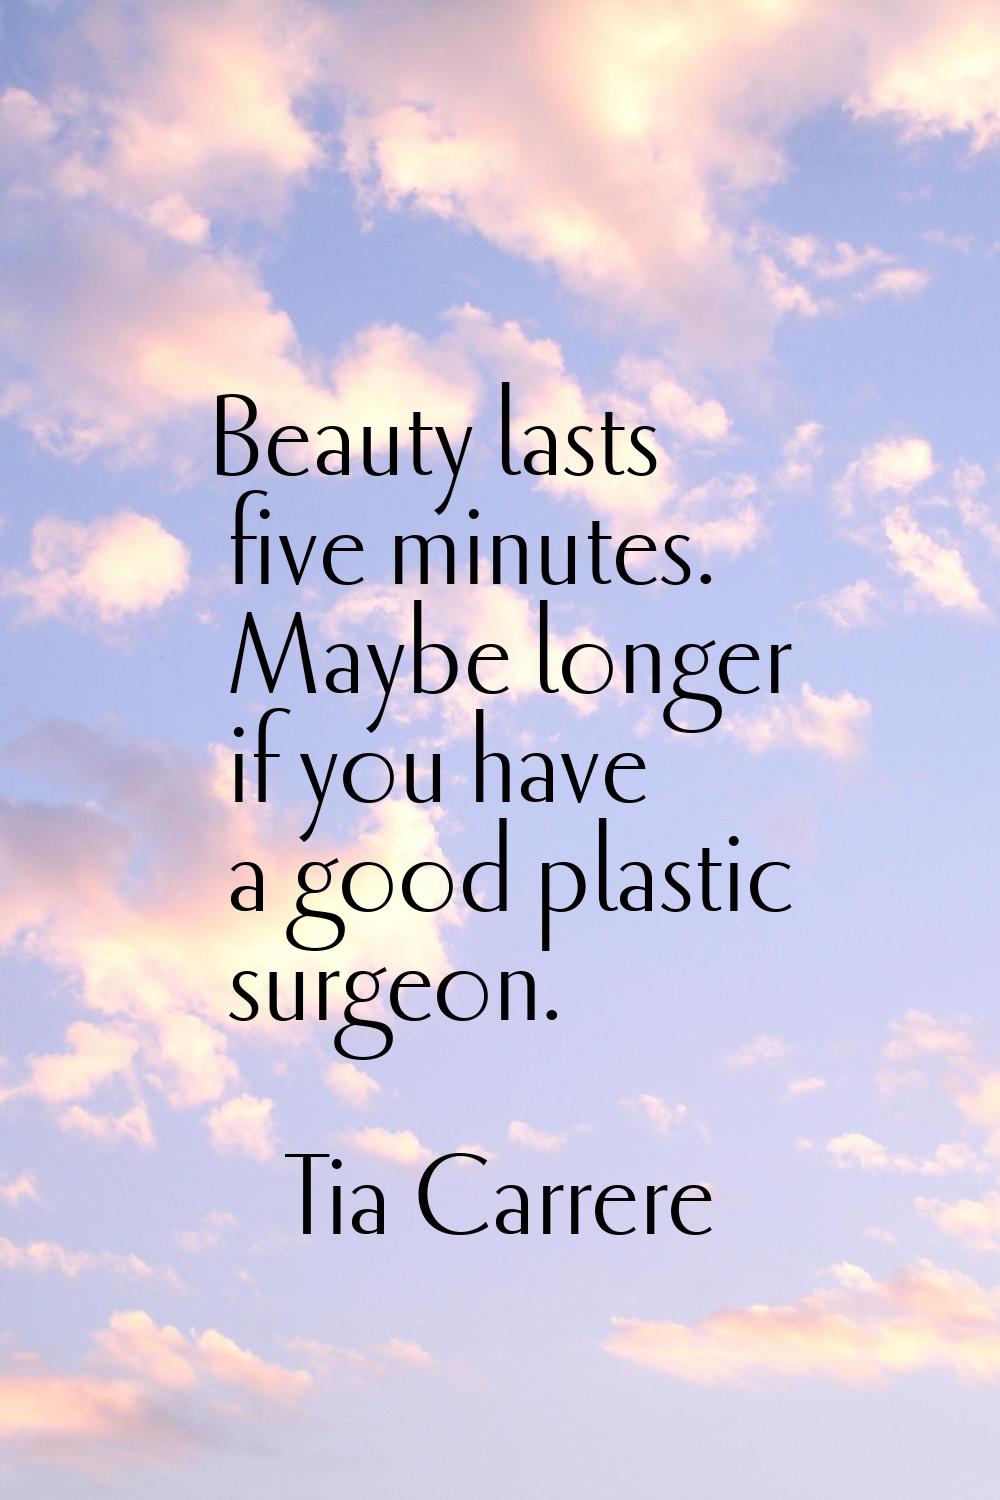 Beauty lasts five minutes. Maybe longer if you have a good plastic surgeon.